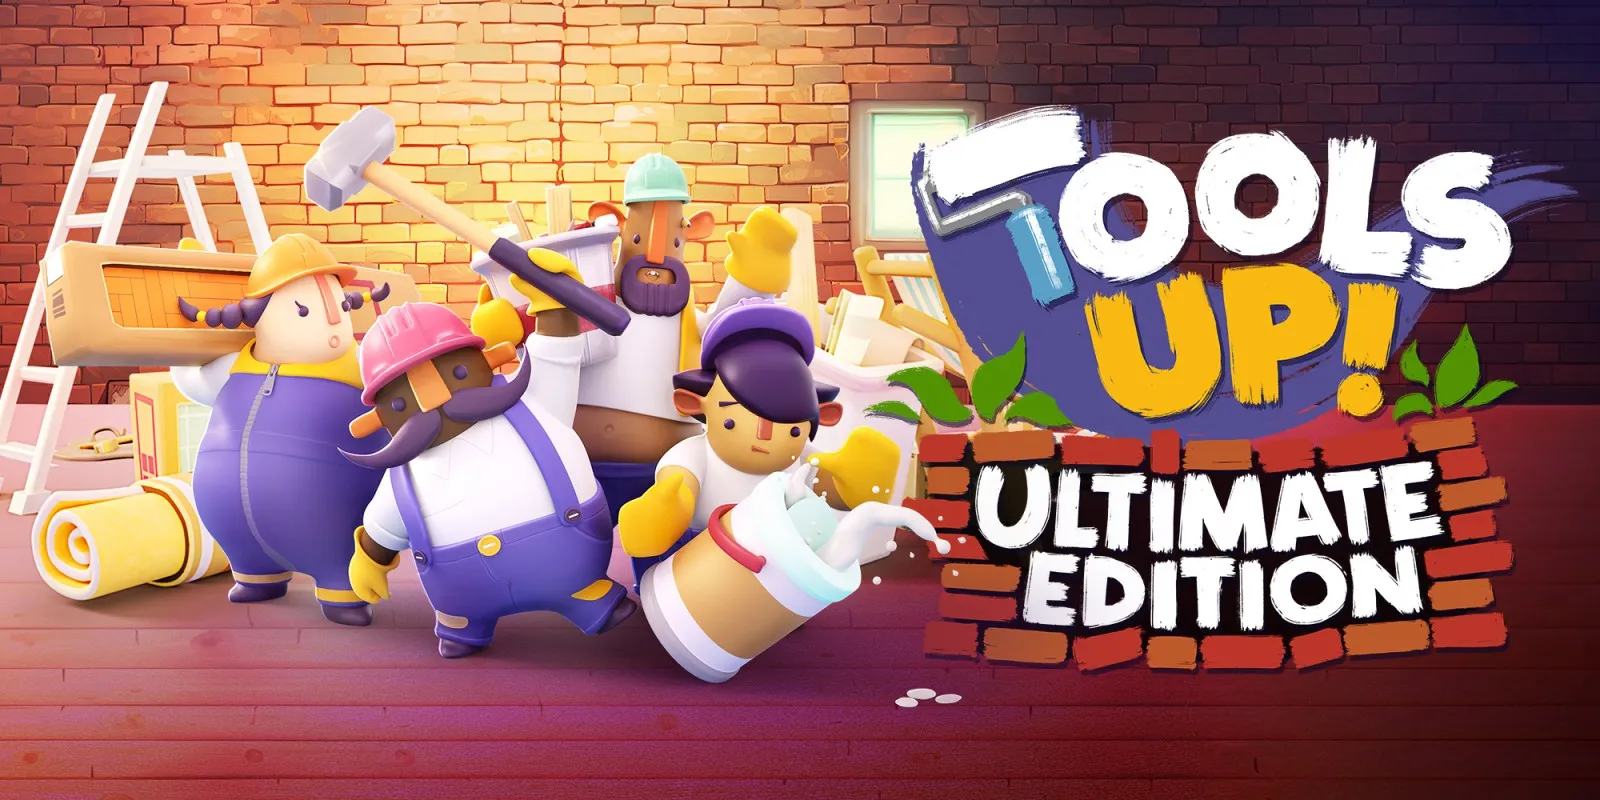 Tools Up ultimate edition cover